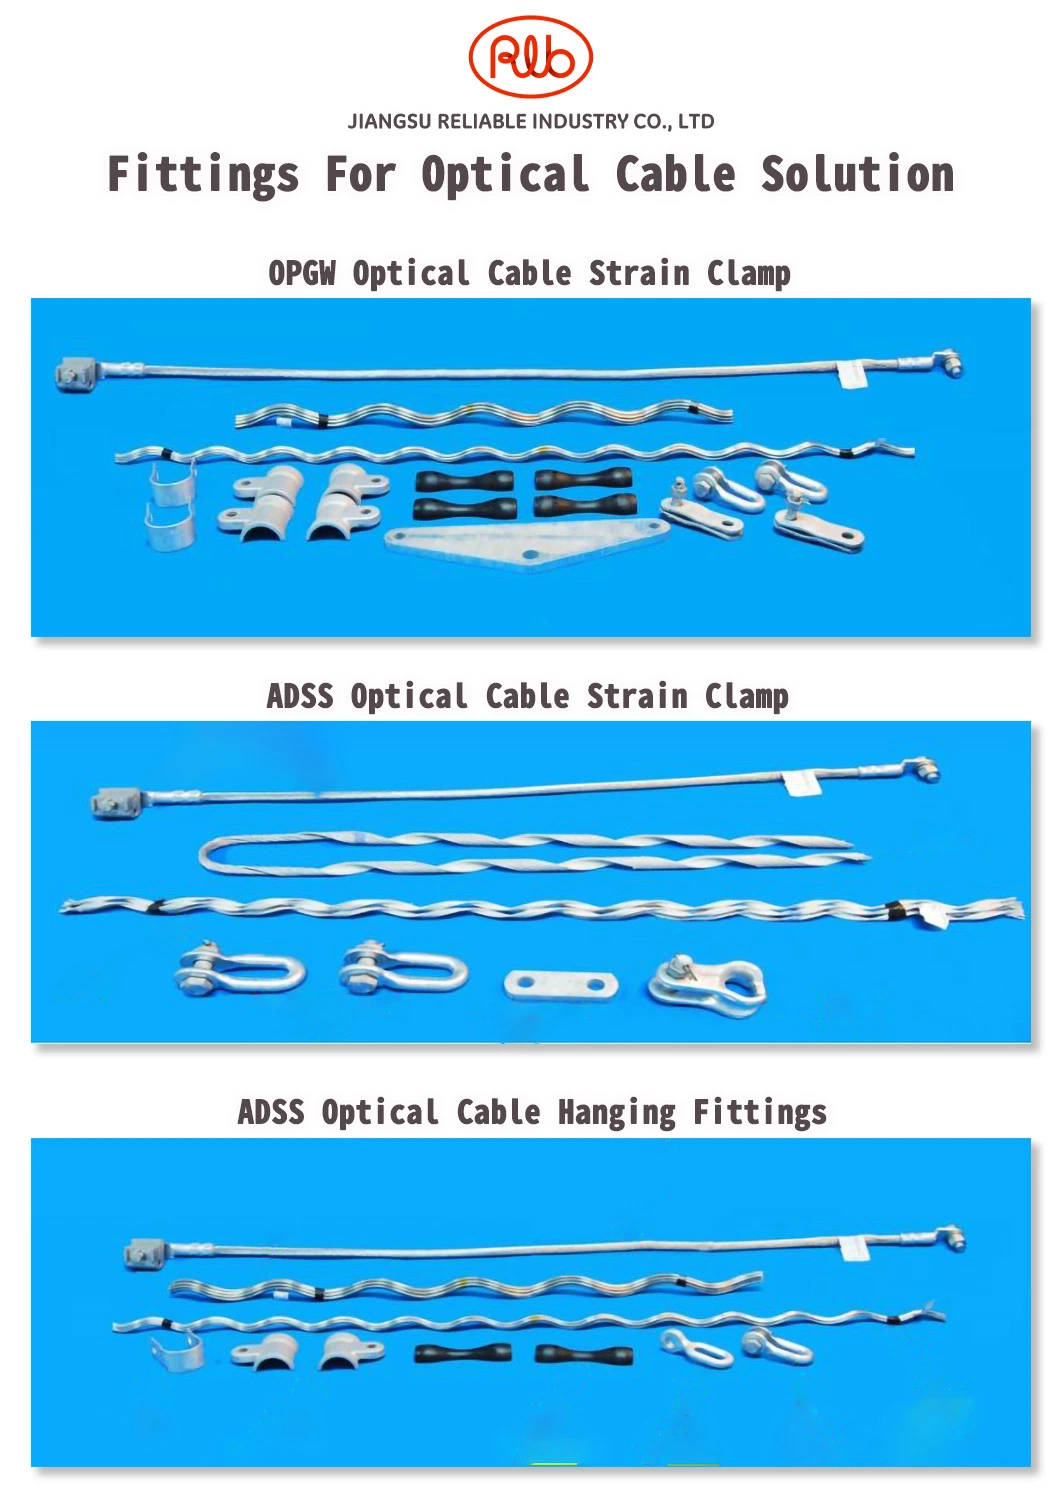 Enough Strength Grip High Quality Preformed Hanging Fittings for Opgw/ADSS Optical Cable